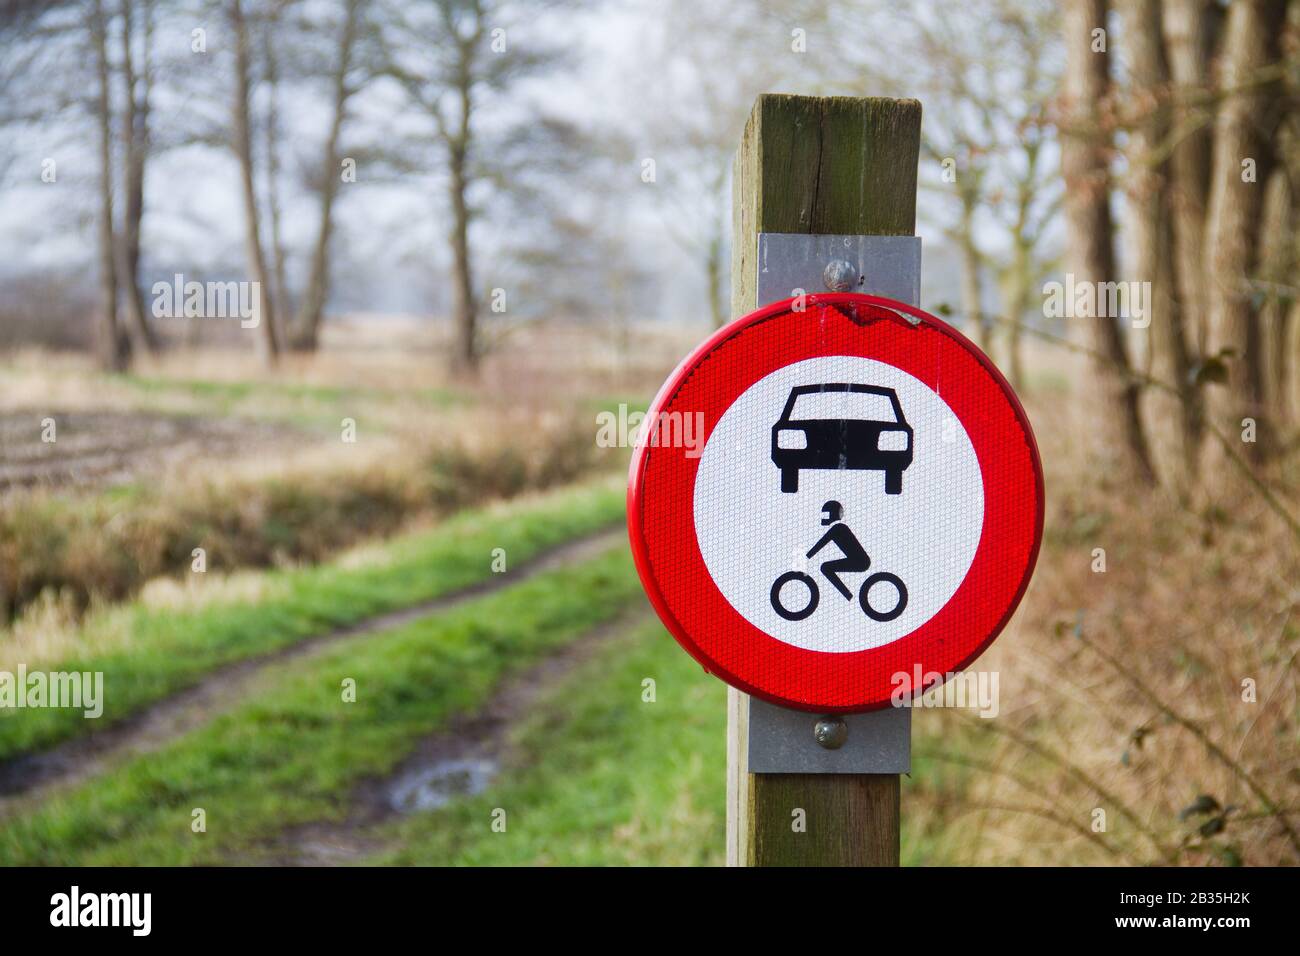 Nature protection: vehicles and motorcycles are banned from a path through a rural landscape Stock Photo